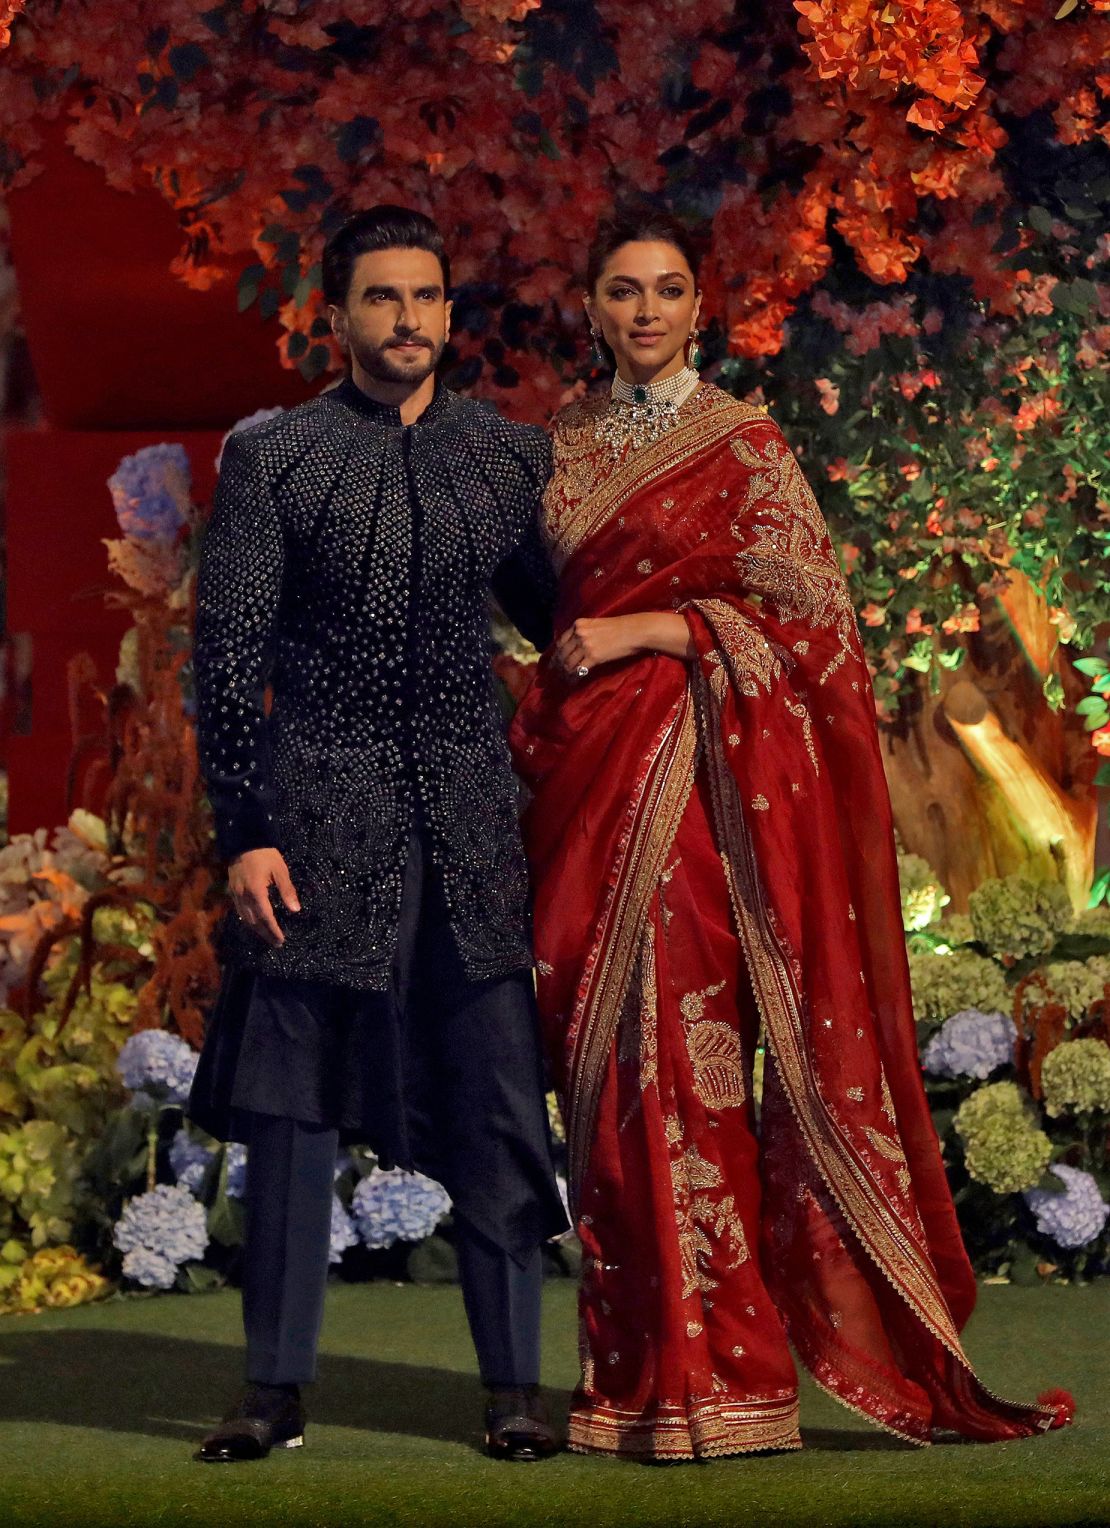 Actor Ranveer Singh and his wife actor Deepika Padukone attend the engagement ceremony in January.